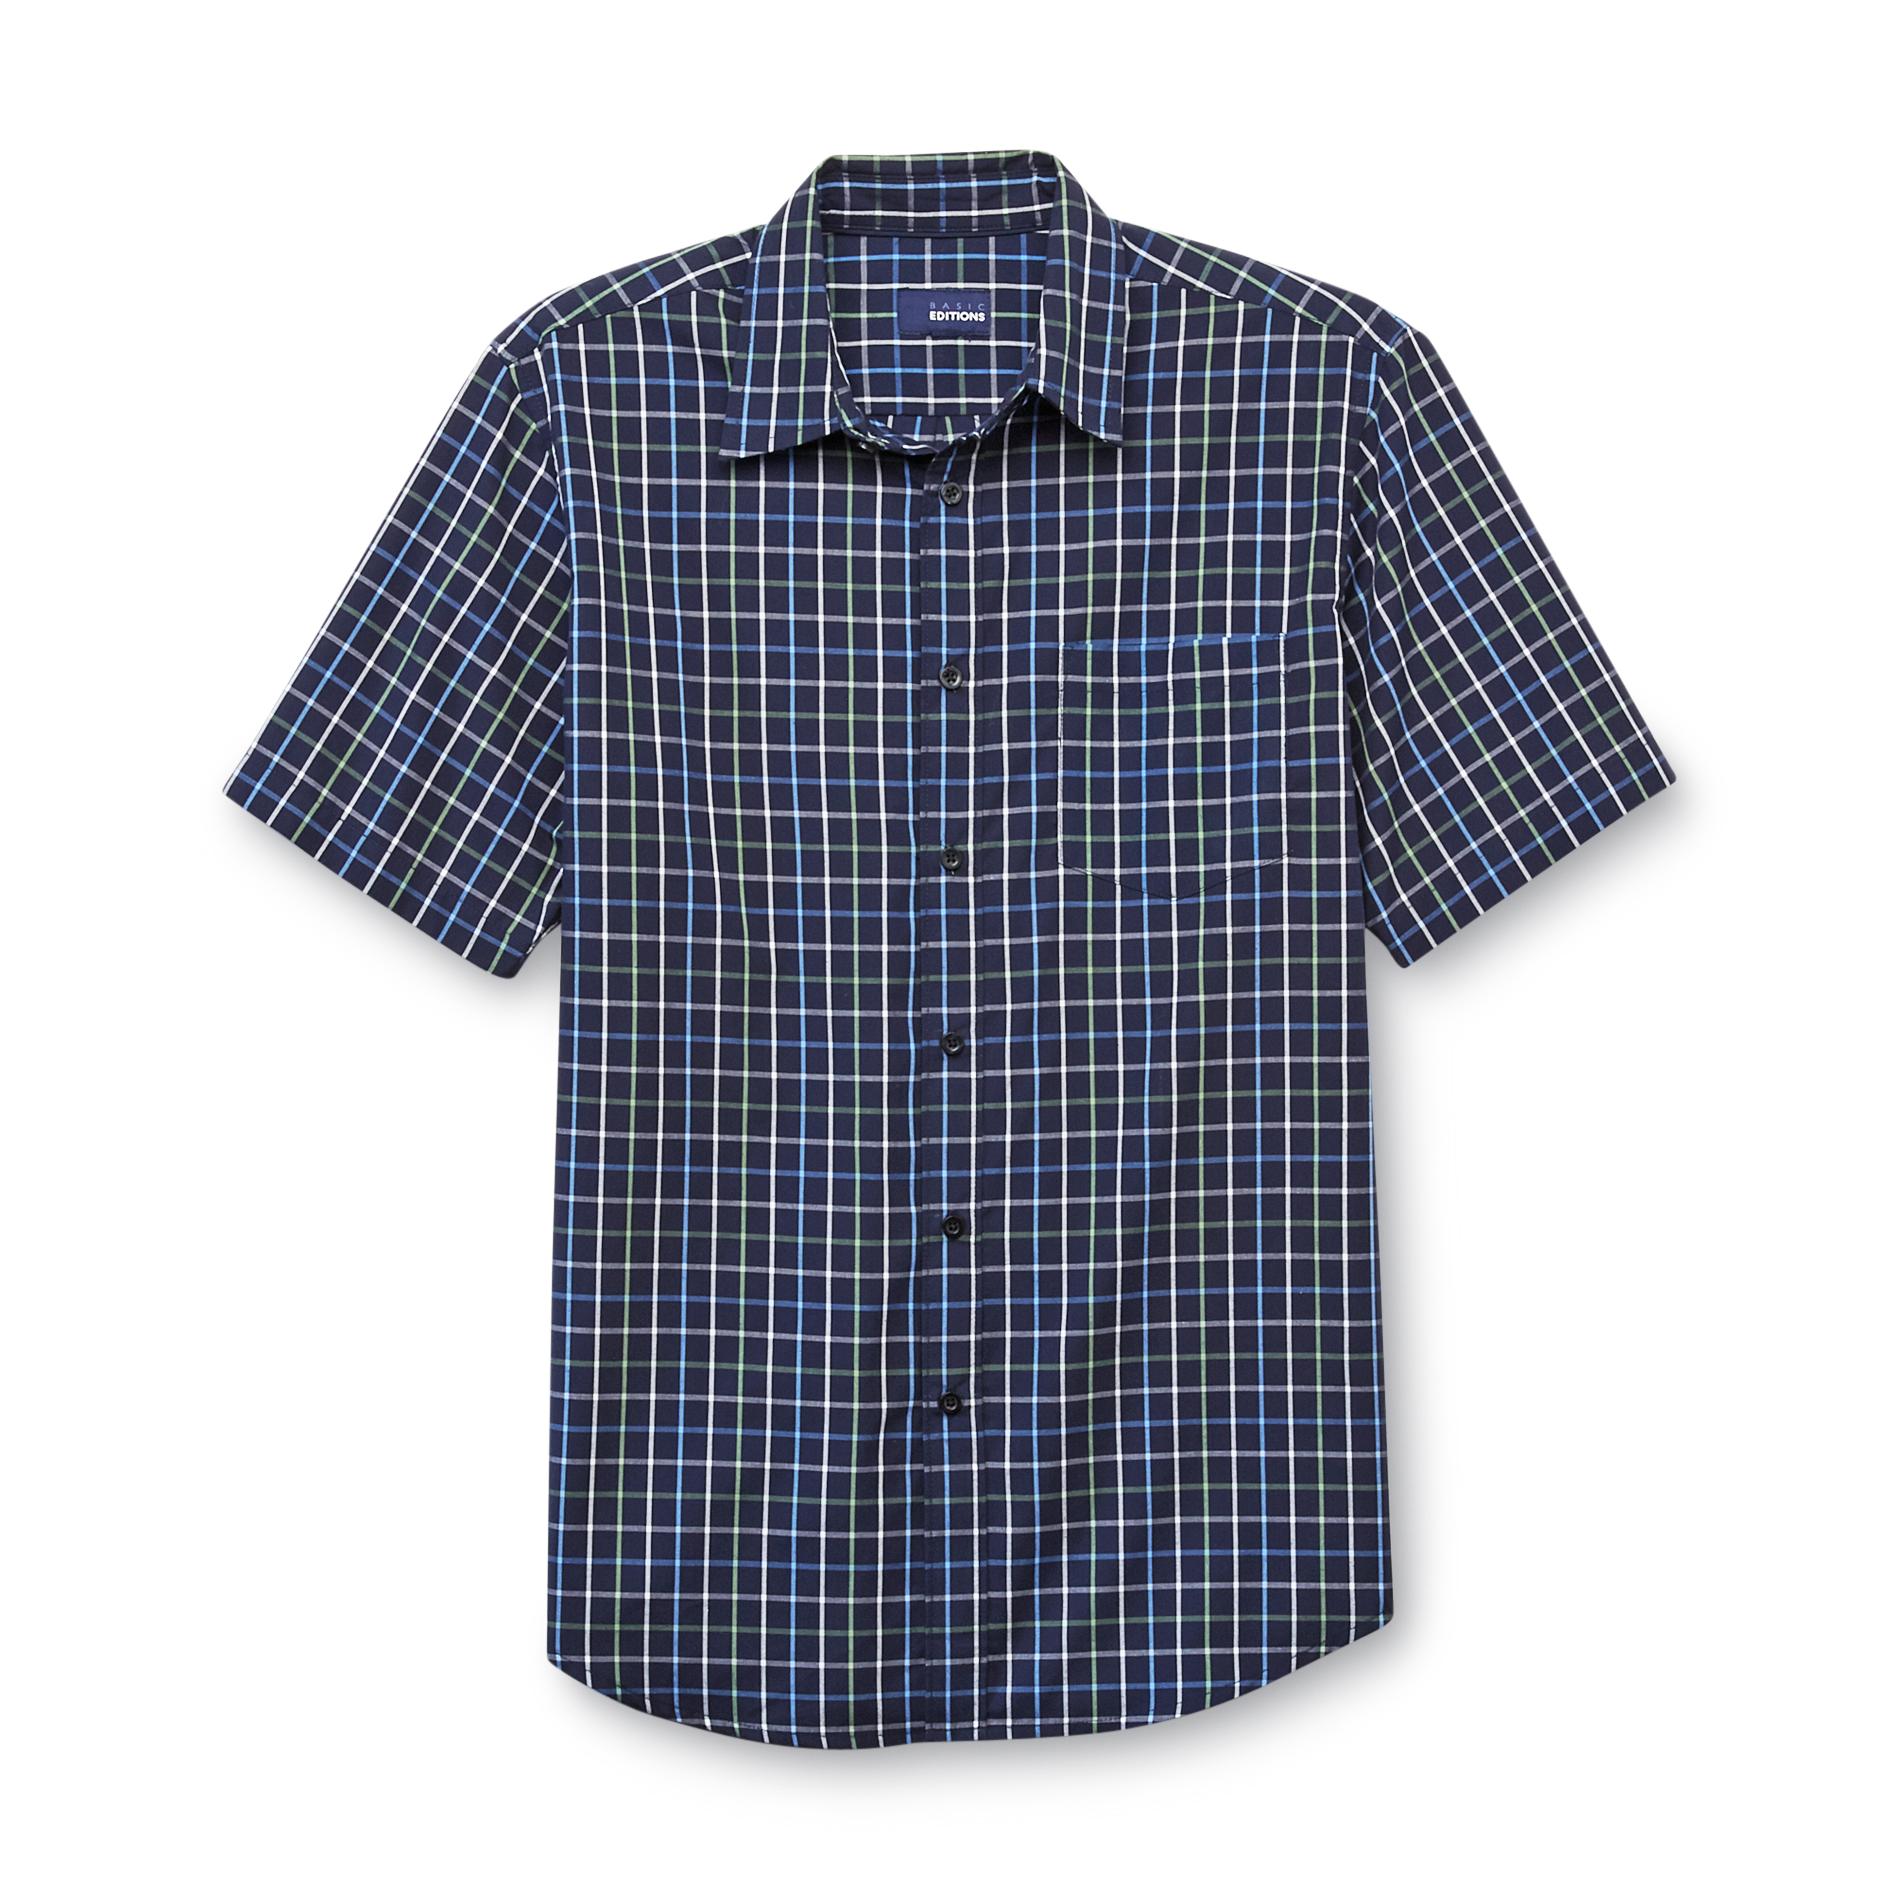 Basic Editions Men's Big & Tall Easy Care Woven Shirt - Plaid